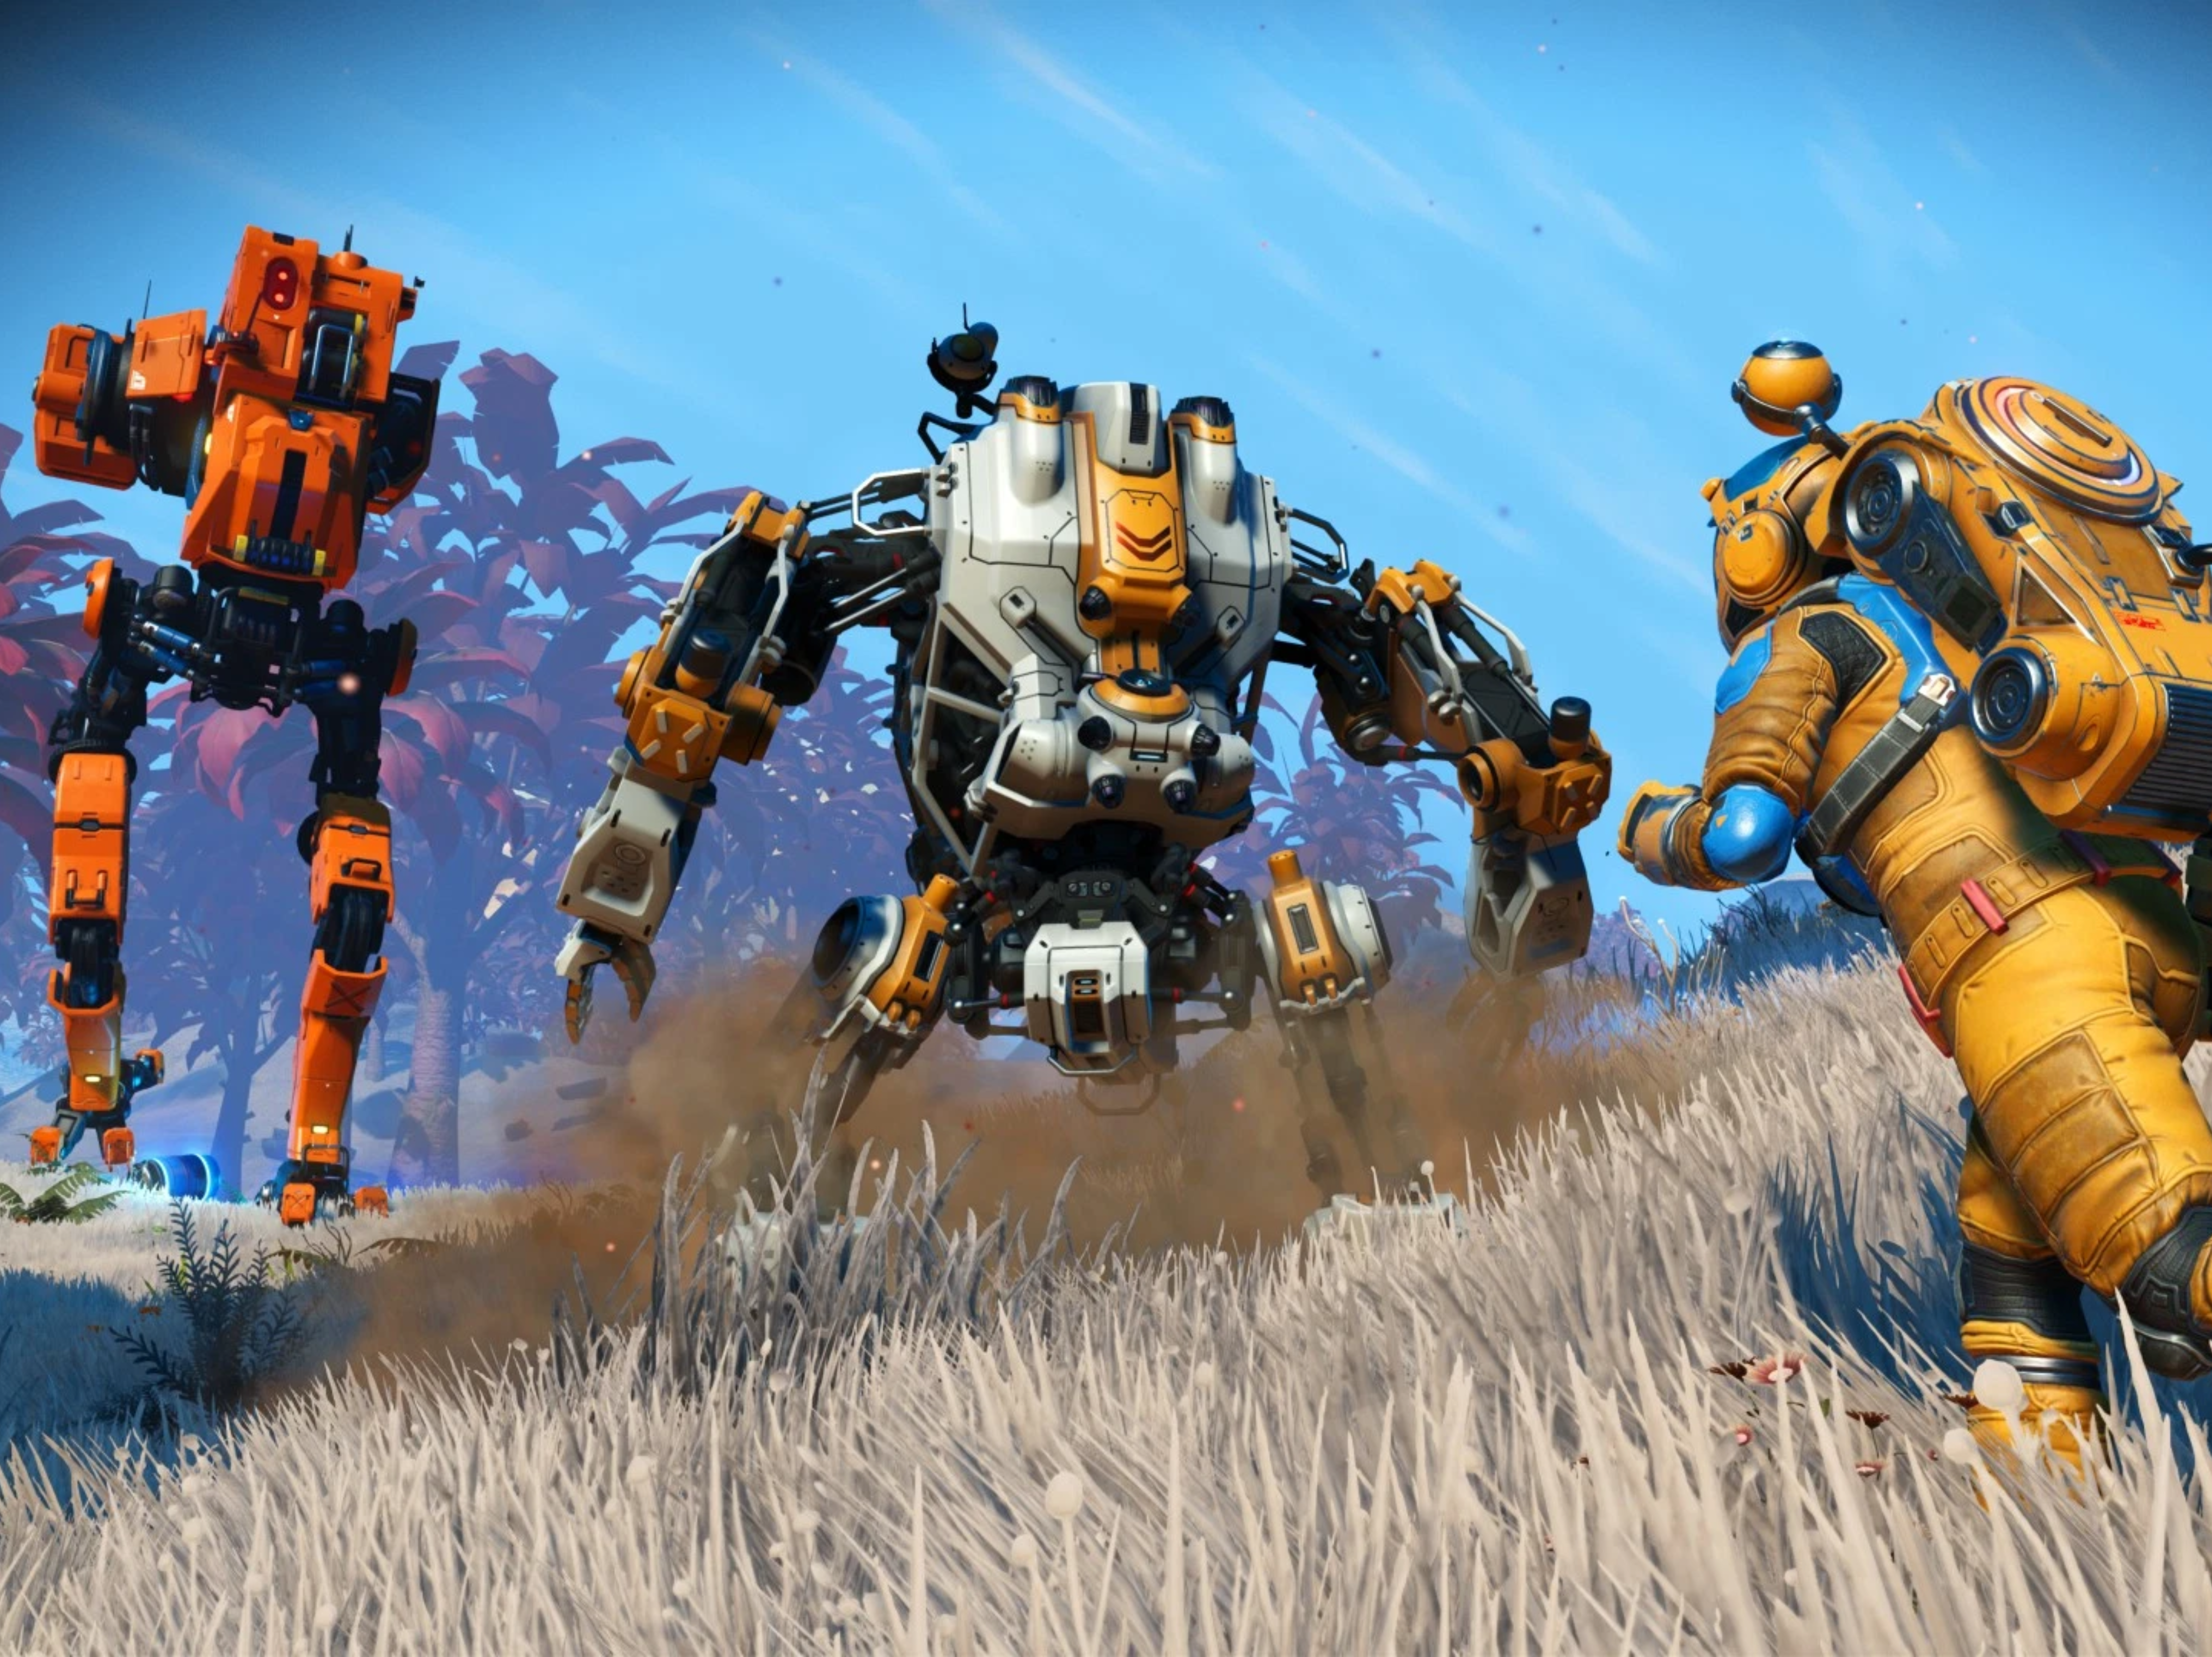 No Man’s Sky latest update, seasonal events, multiplayer expeditions and more